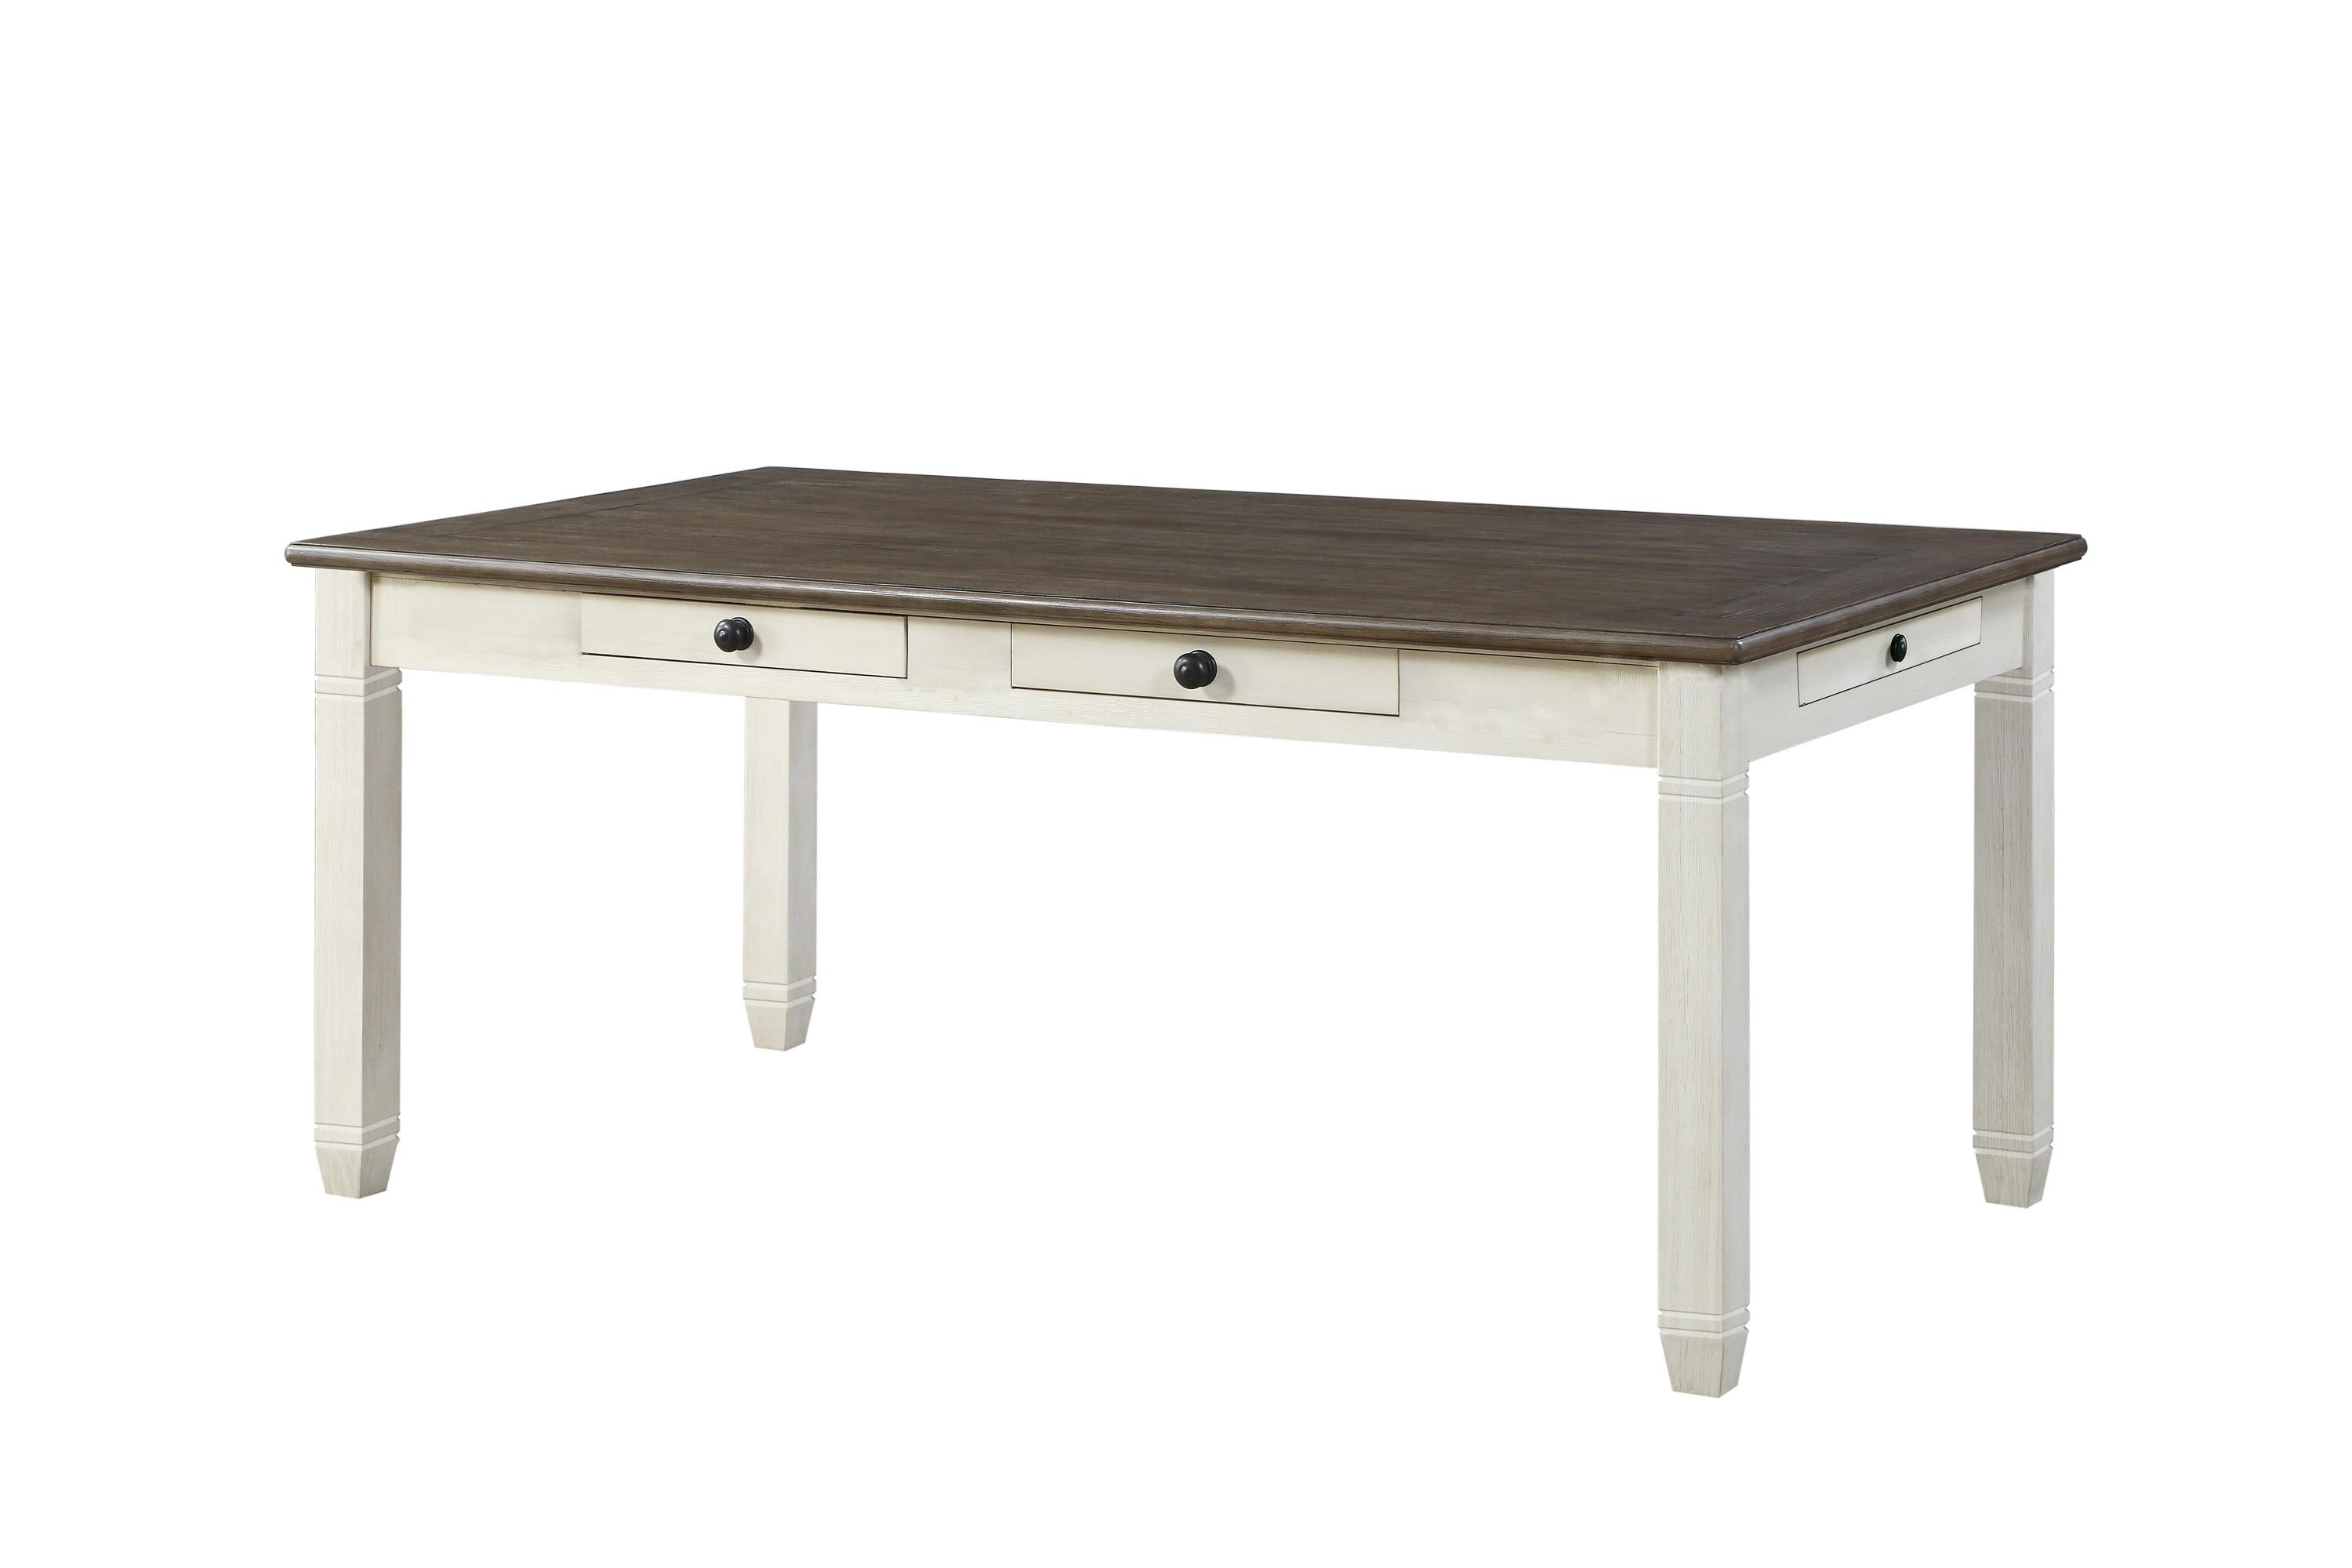 Casual Dining Table 5627NW-72 Granby 5627NW-72 in Antique White 